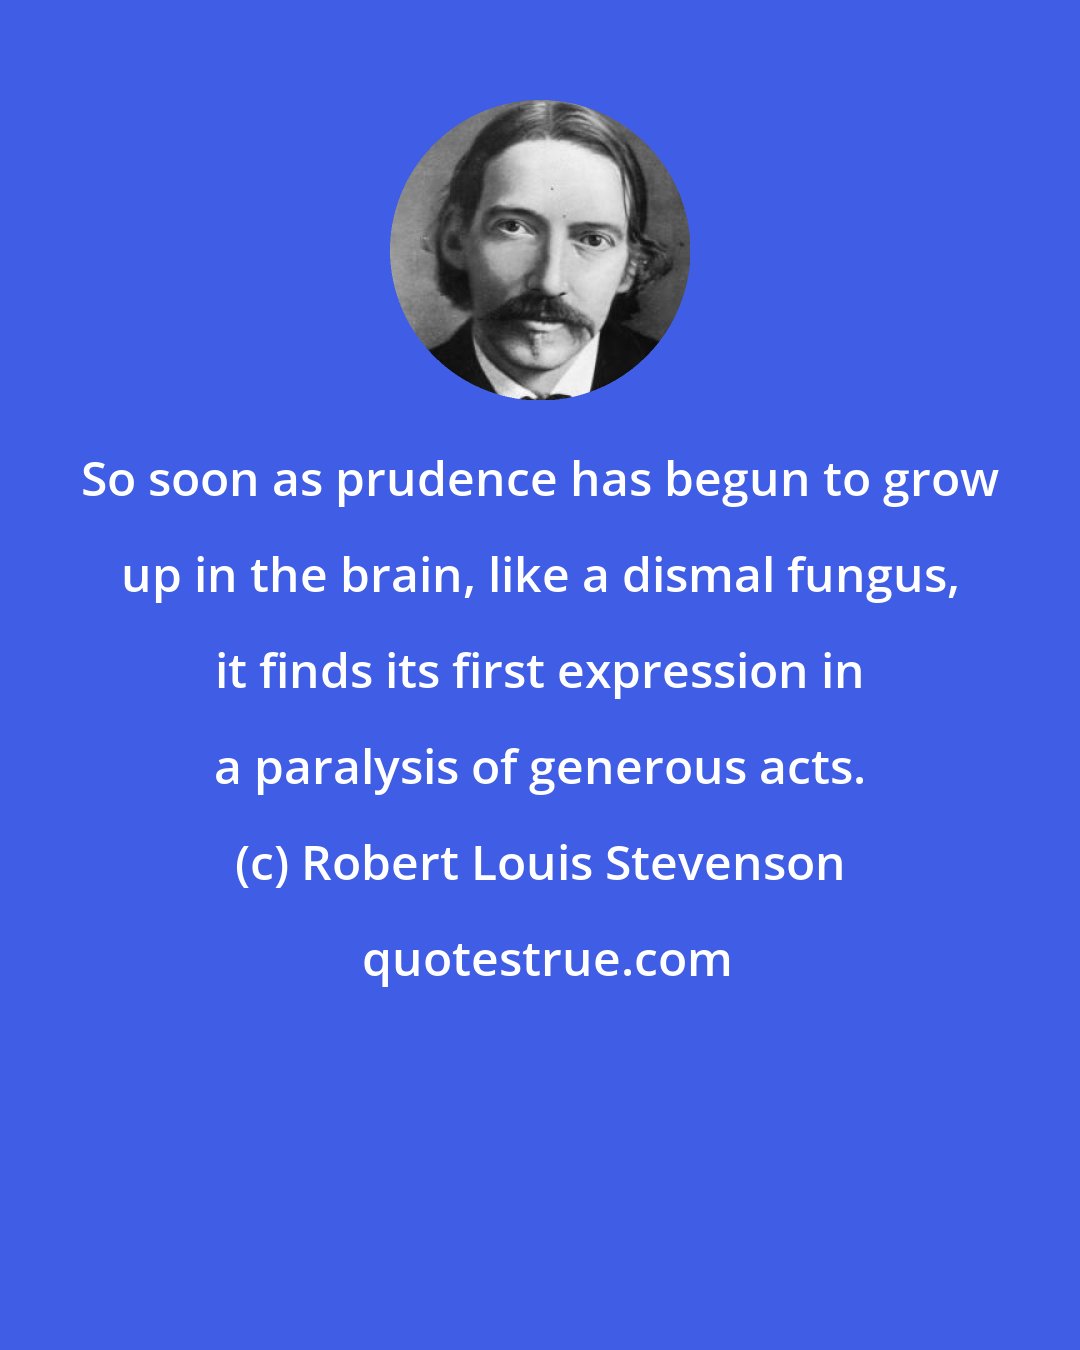 Robert Louis Stevenson: So soon as prudence has begun to grow up in the brain, like a dismal fungus, it finds its first expression in a paralysis of generous acts.